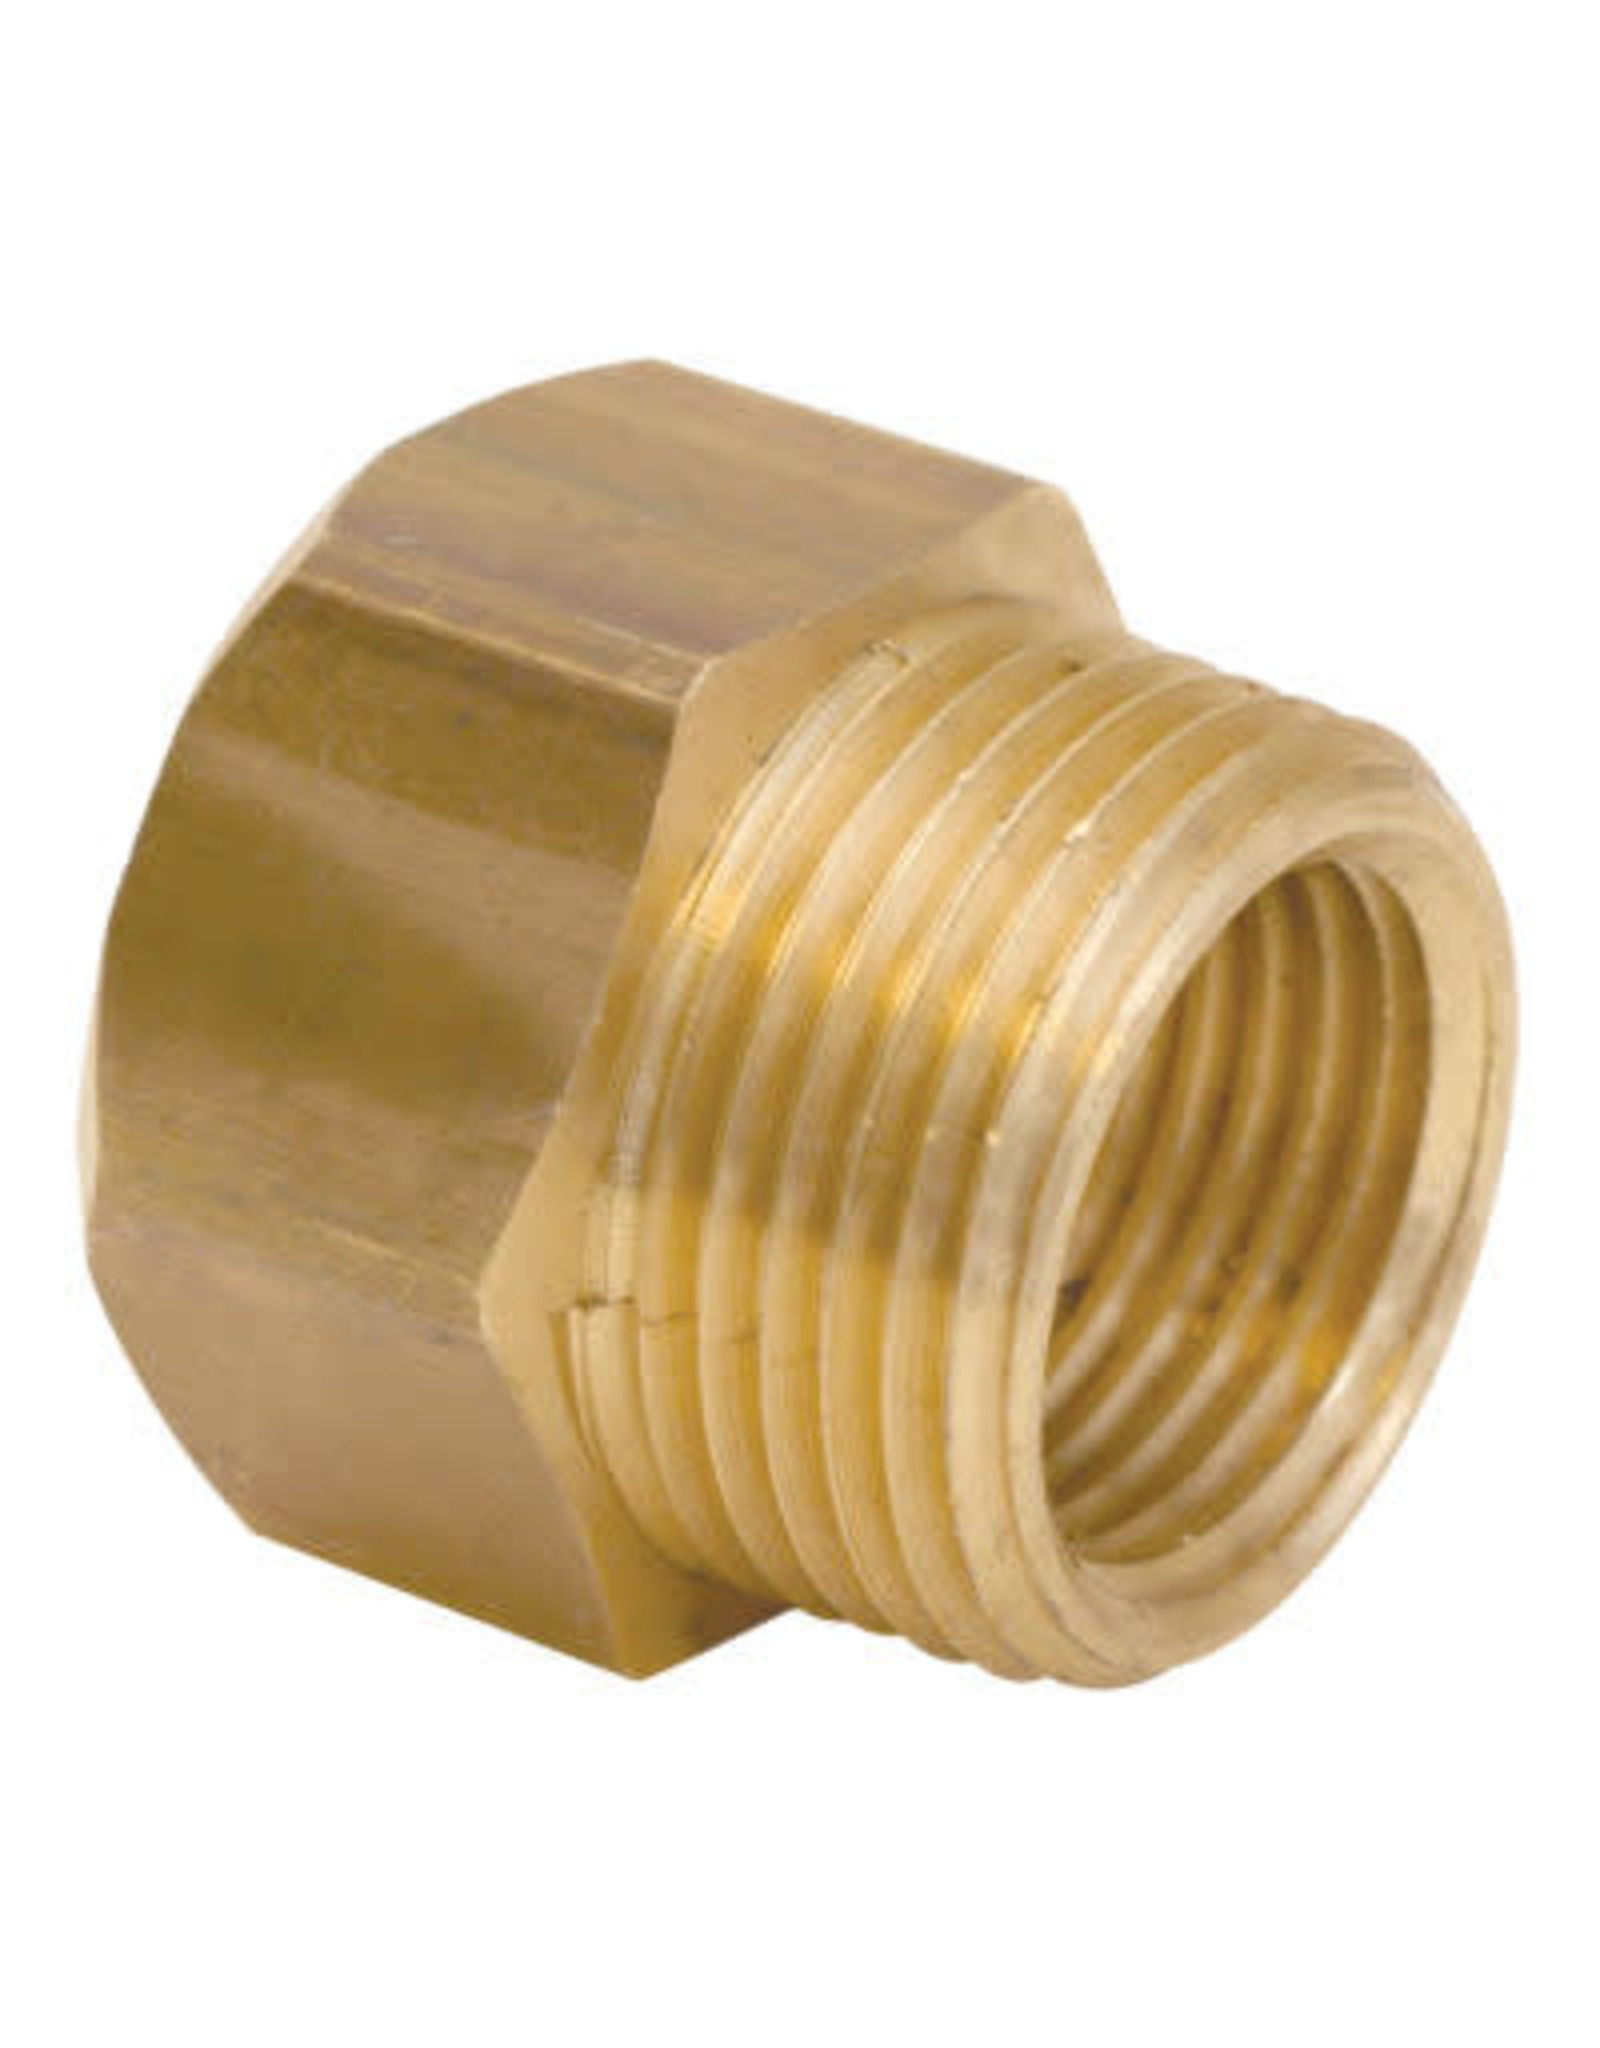 HOSE-TO-PIPE ADAPTER